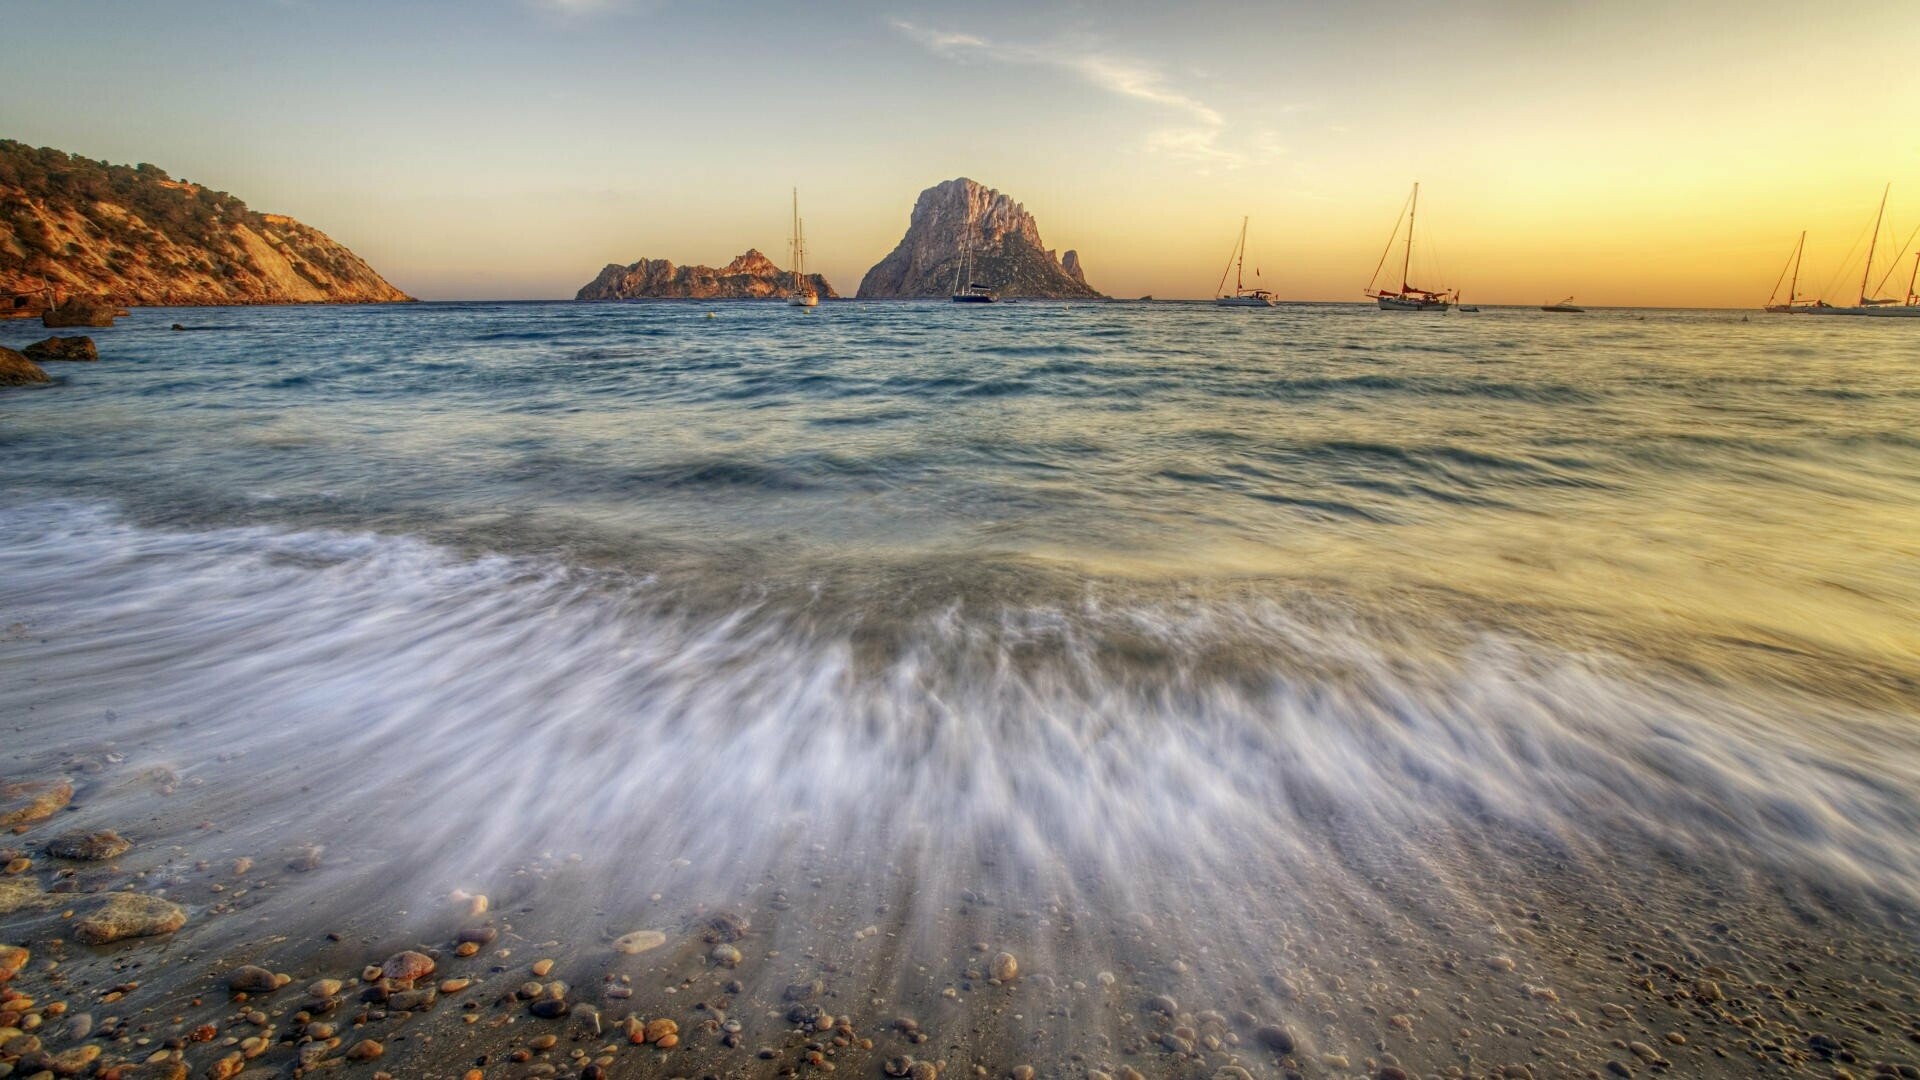 Sunset in Ibiza, Horizon painted, Fiery colors, Tranquil beauty, 1920x1080 Full HD Desktop